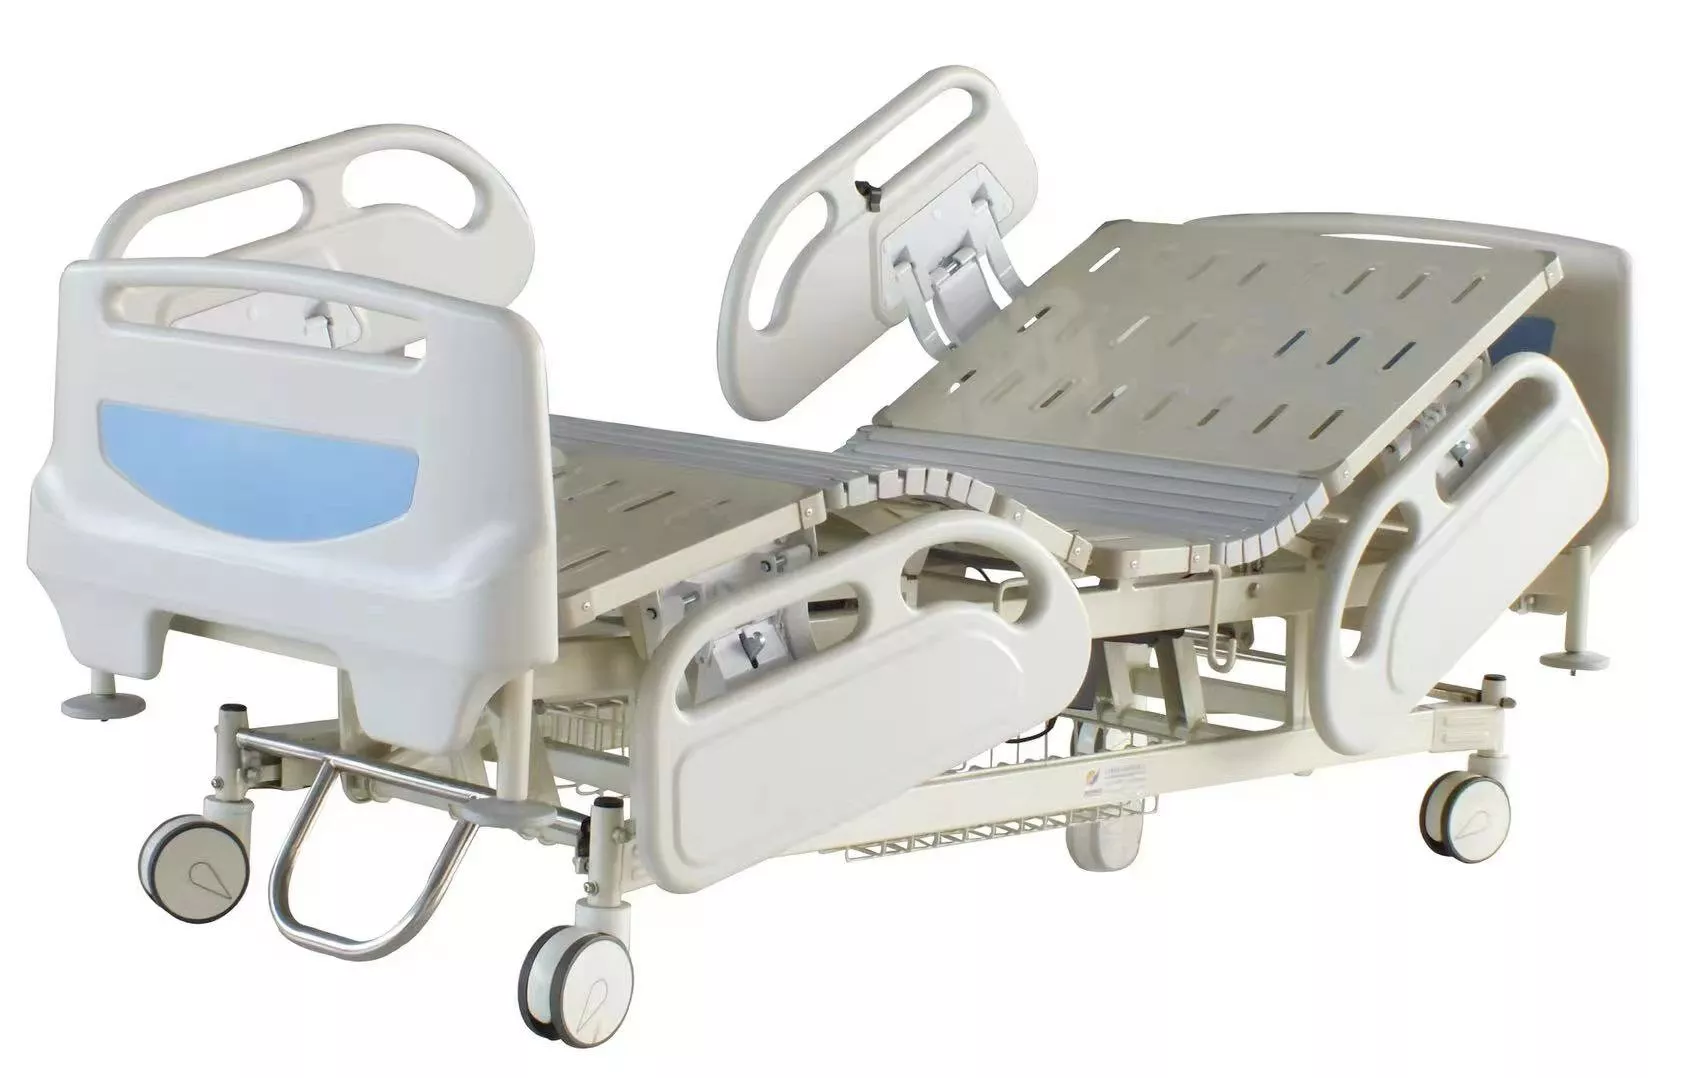 HR-858 Five Functions Electric Hospital Bed Price in Bangladesh